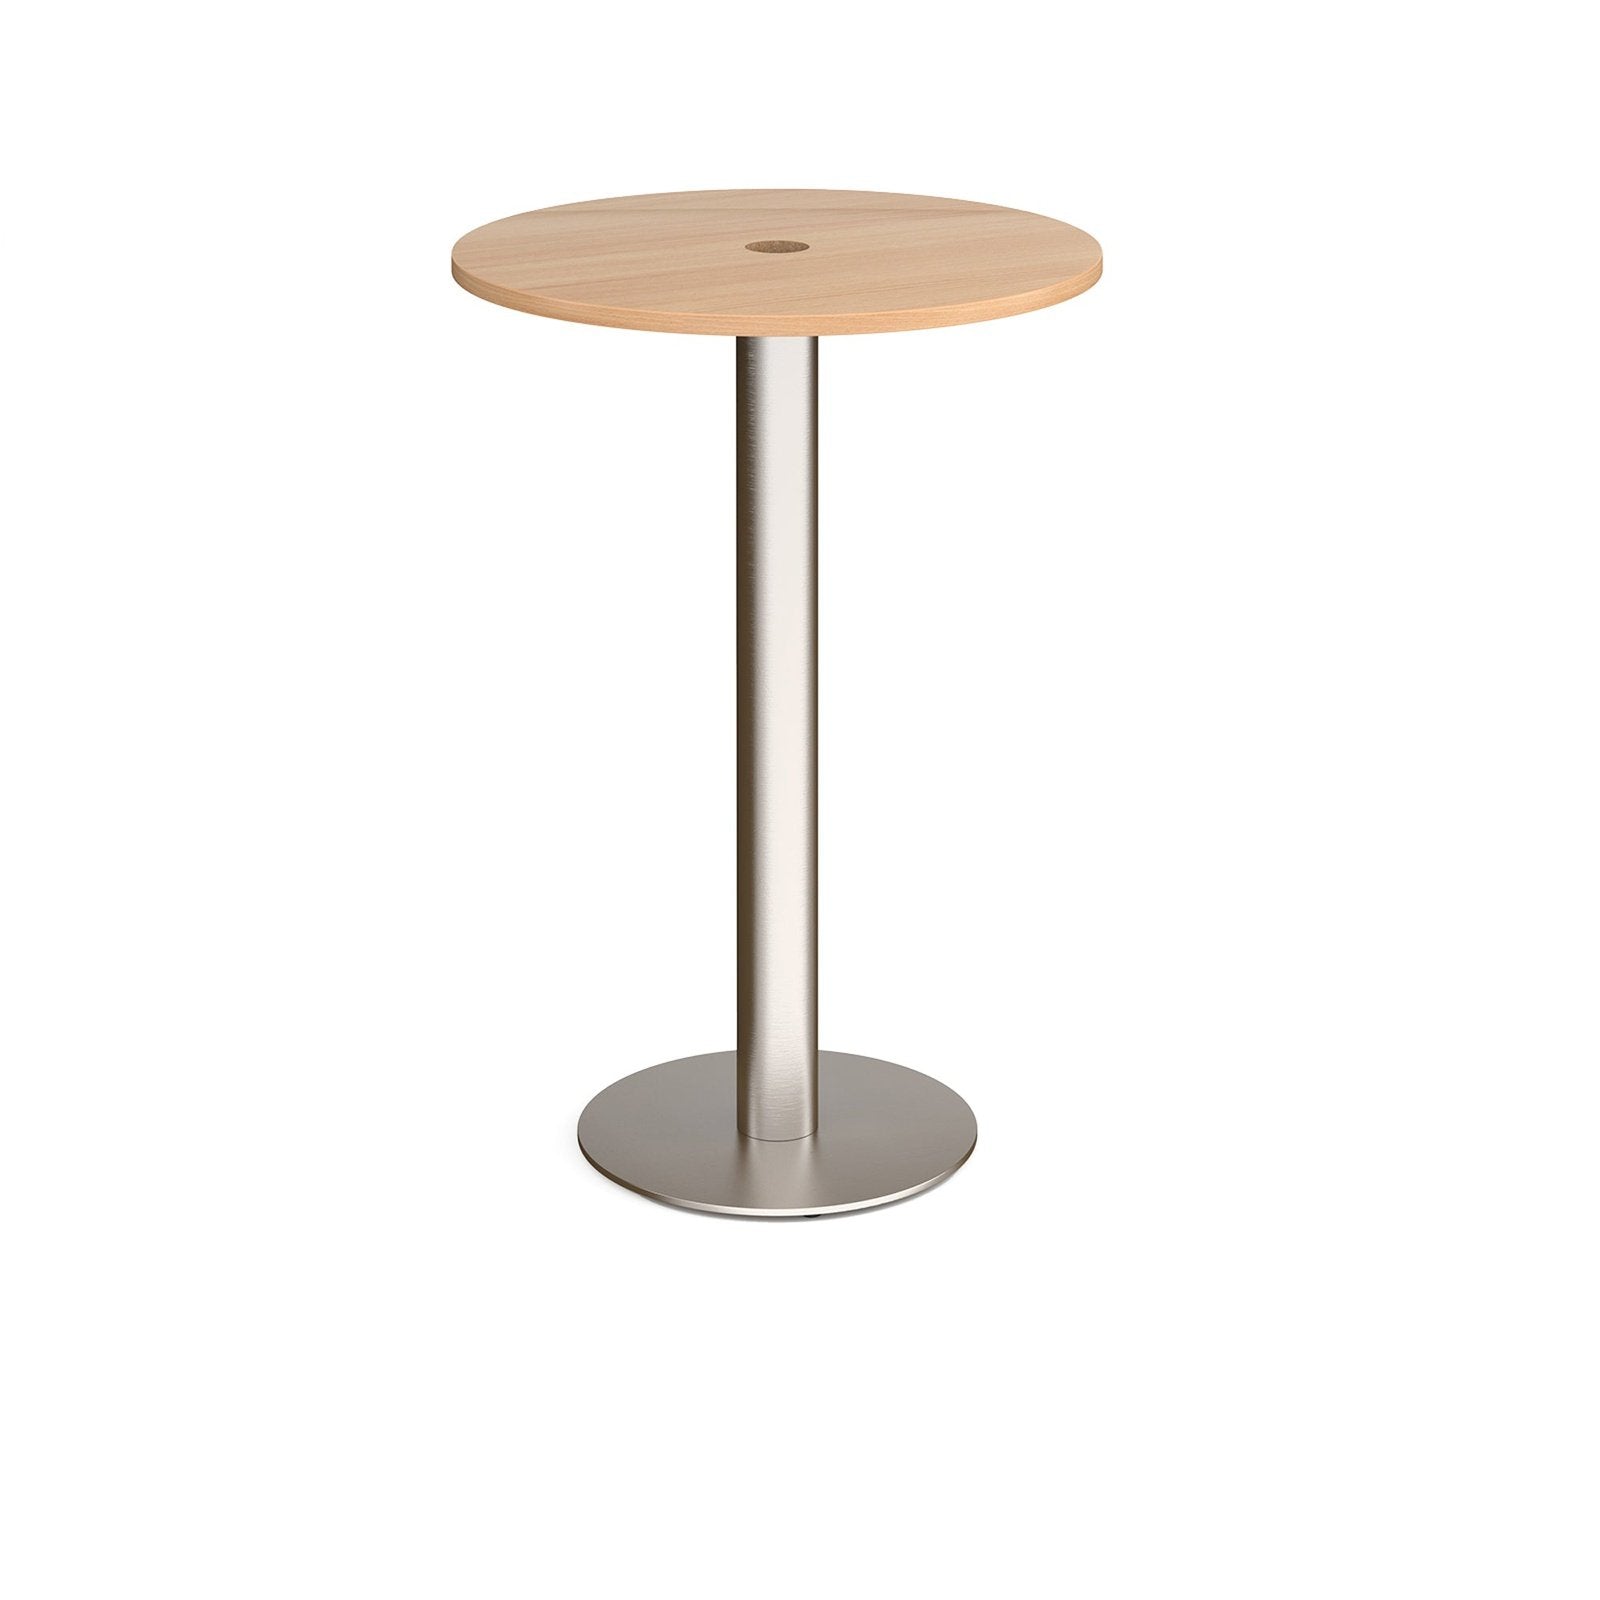 Monza poseur table 800mm with central circular cutout 80mm - Office Products Online